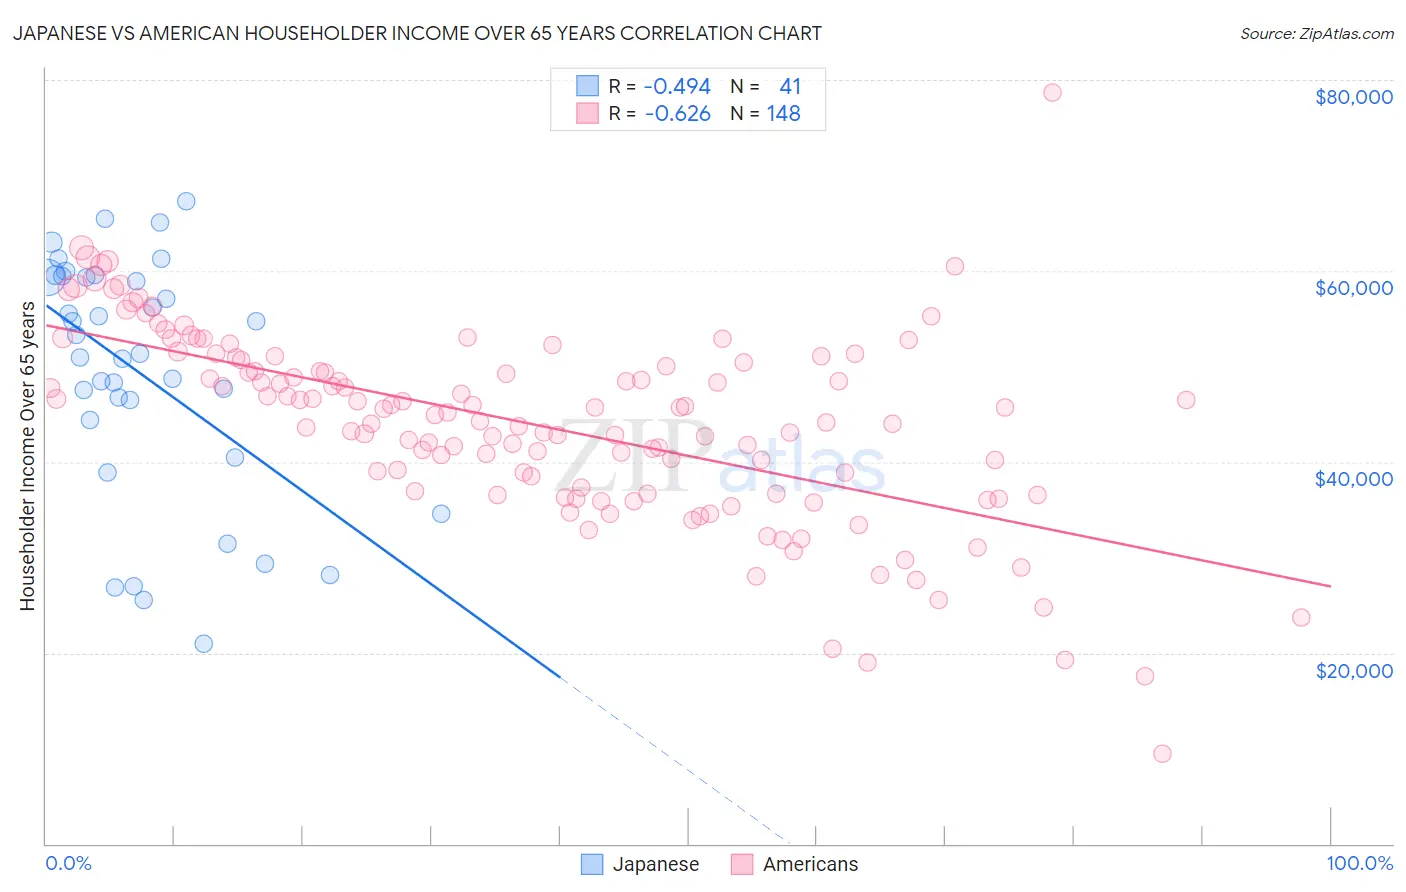 Japanese vs American Householder Income Over 65 years